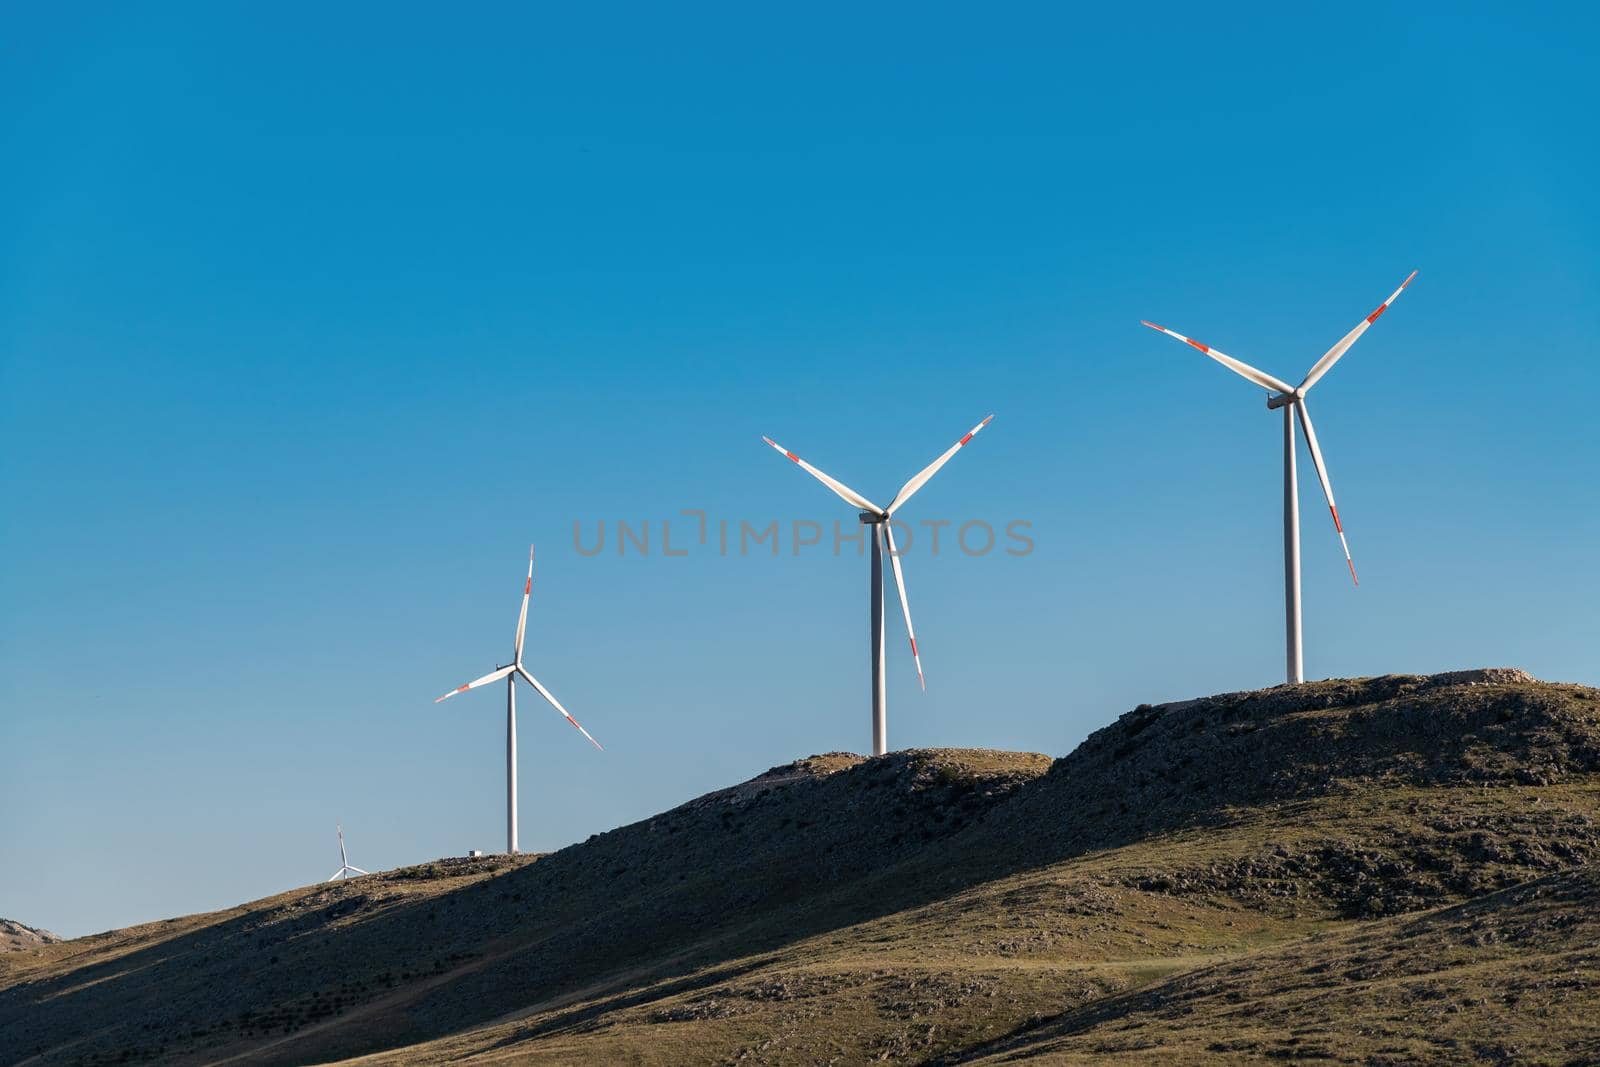 clean electricity producing wind turbine or windmill built on a windy mountain ridge